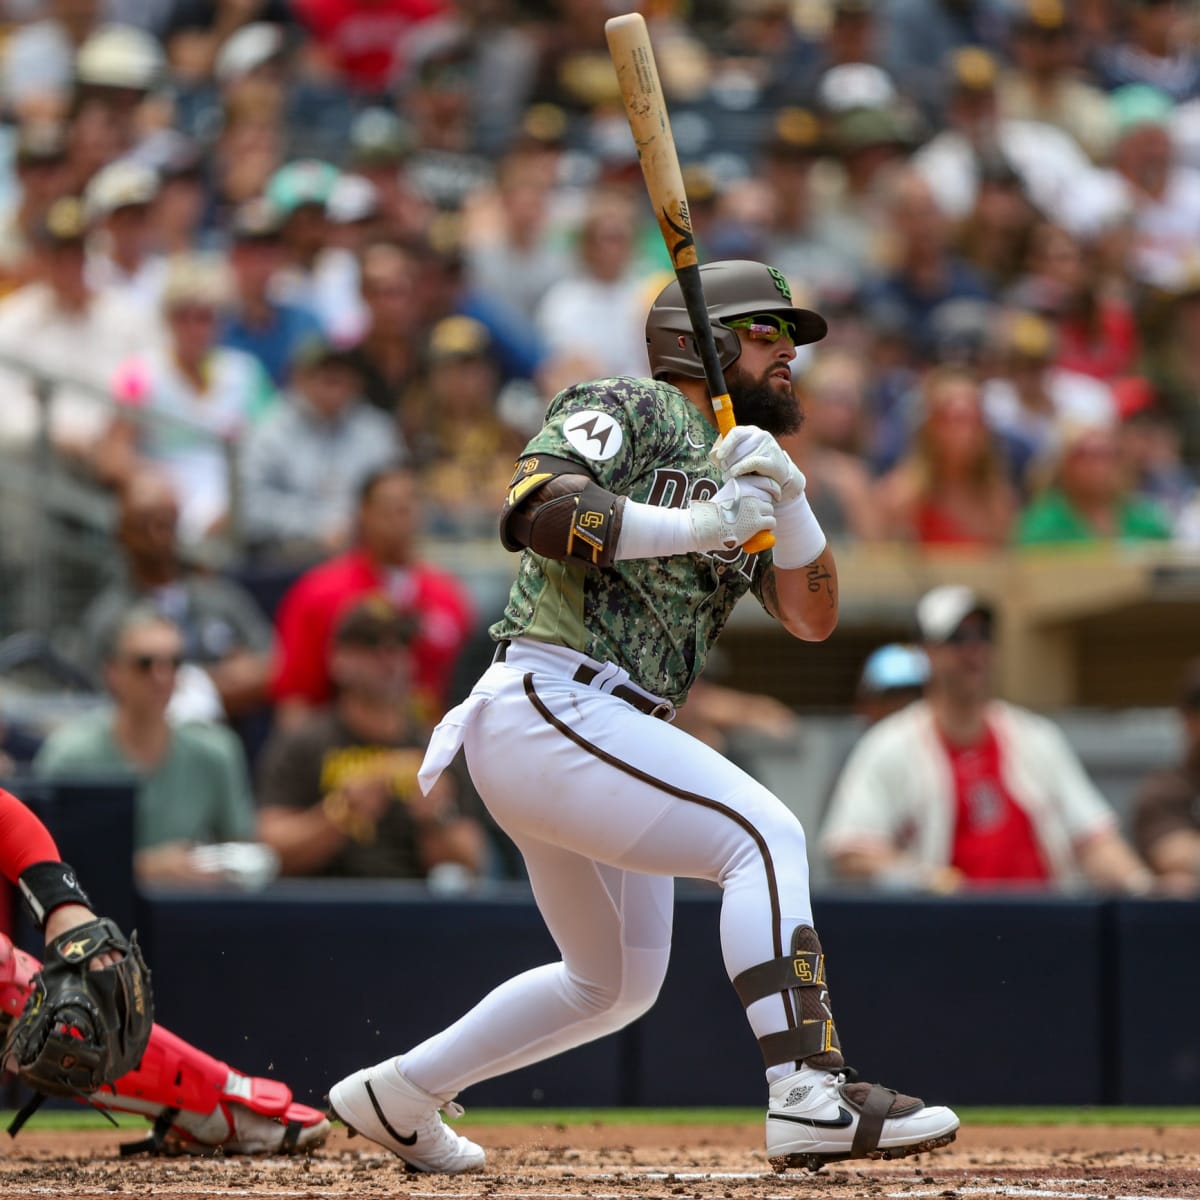 Padres sign infielder Rougned Odor to minor-league deal, per report 